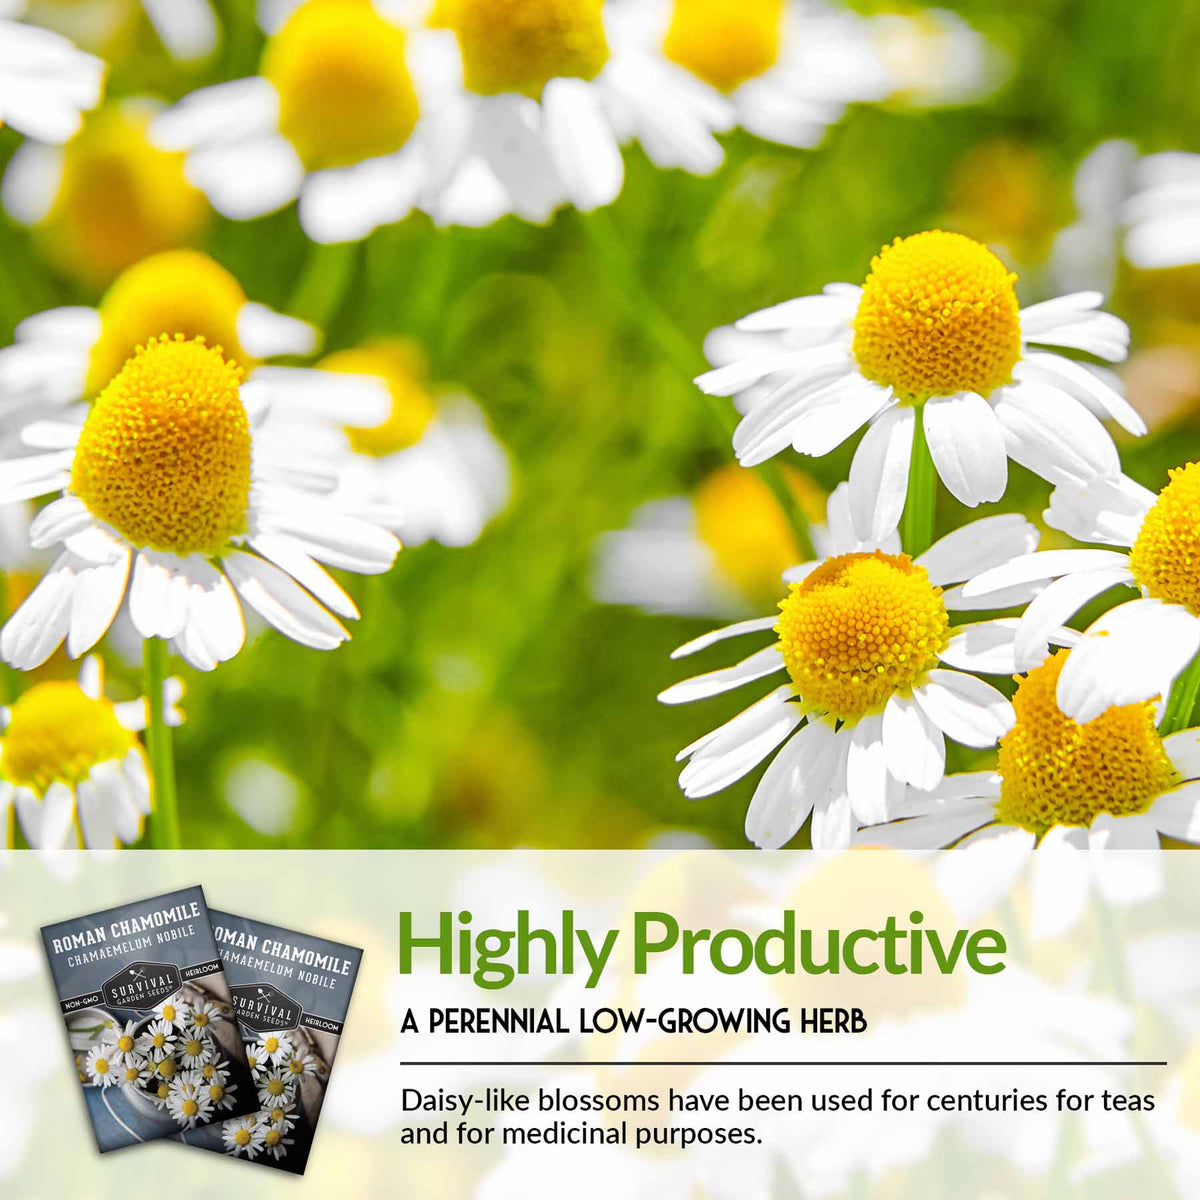 Chamomile is a highly productive low-growing herb